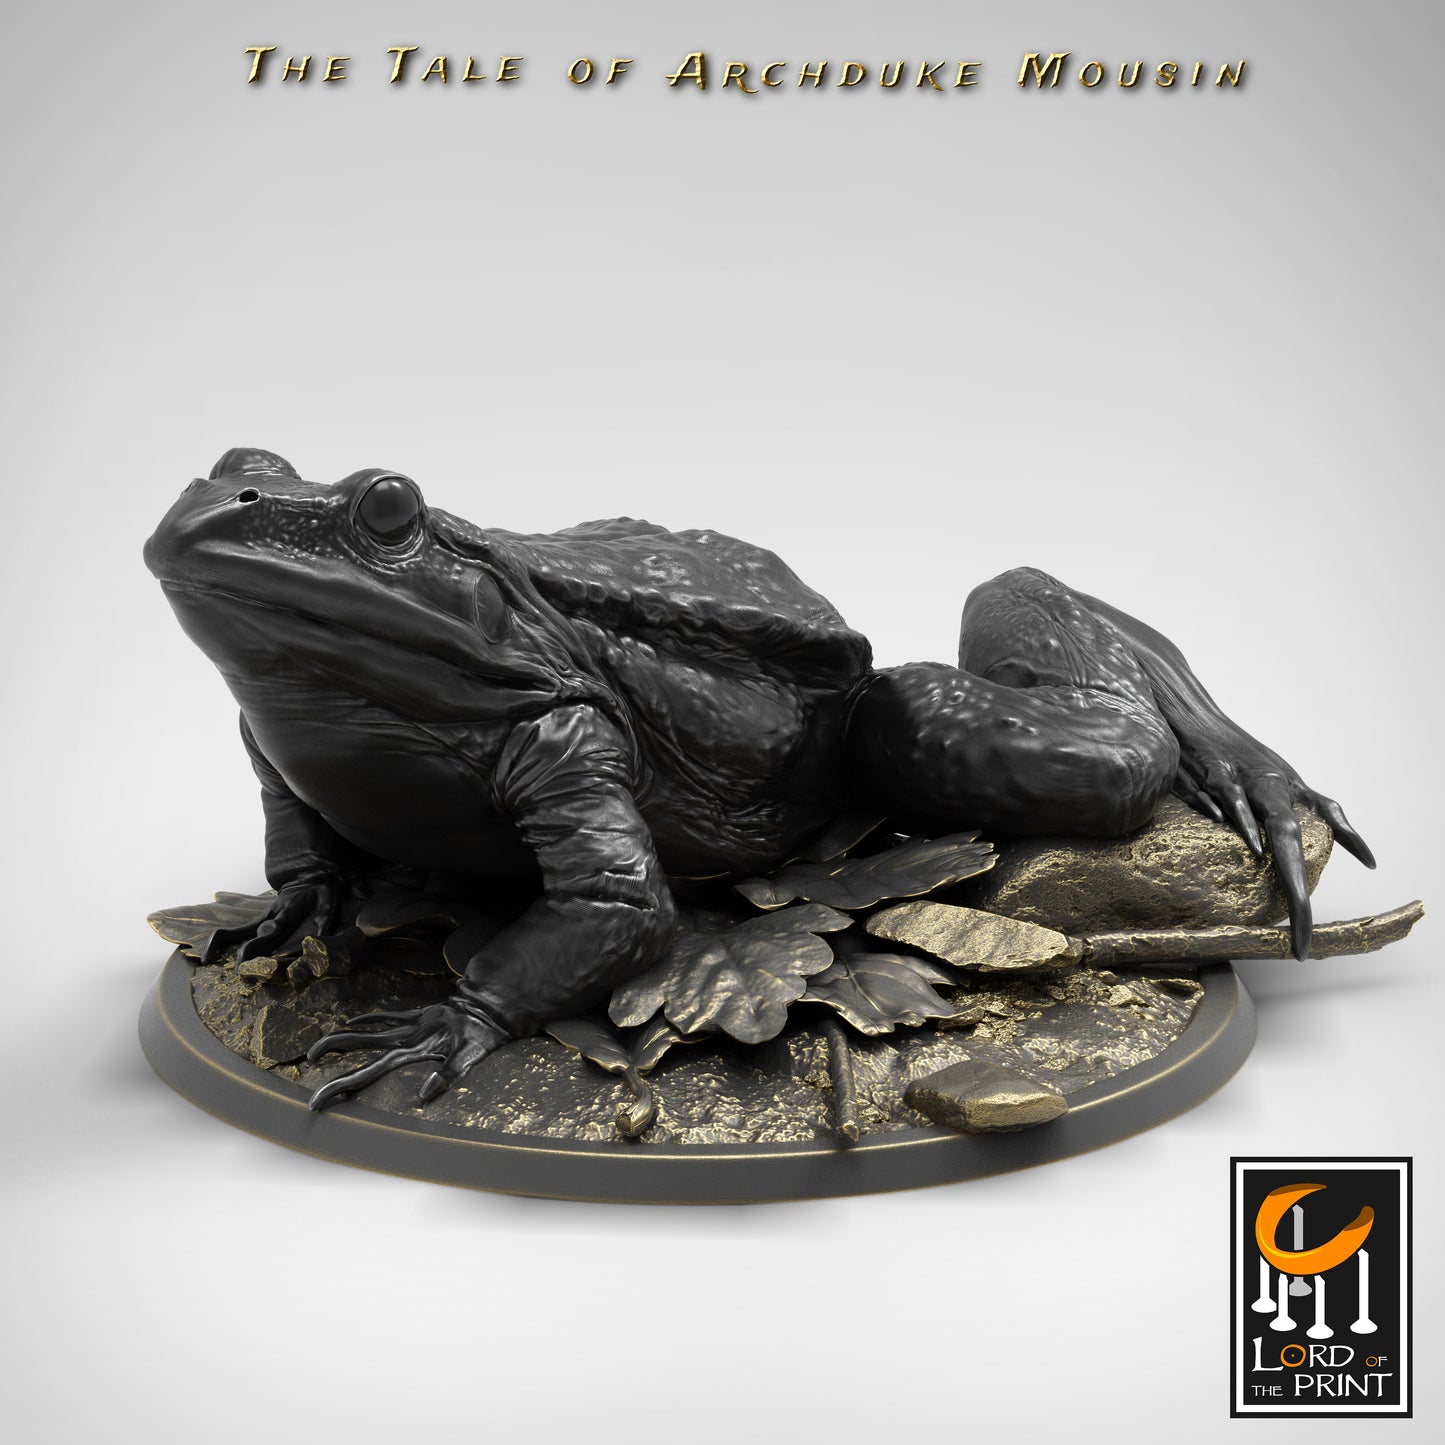 Frogs - The tale of Archduke Mousin